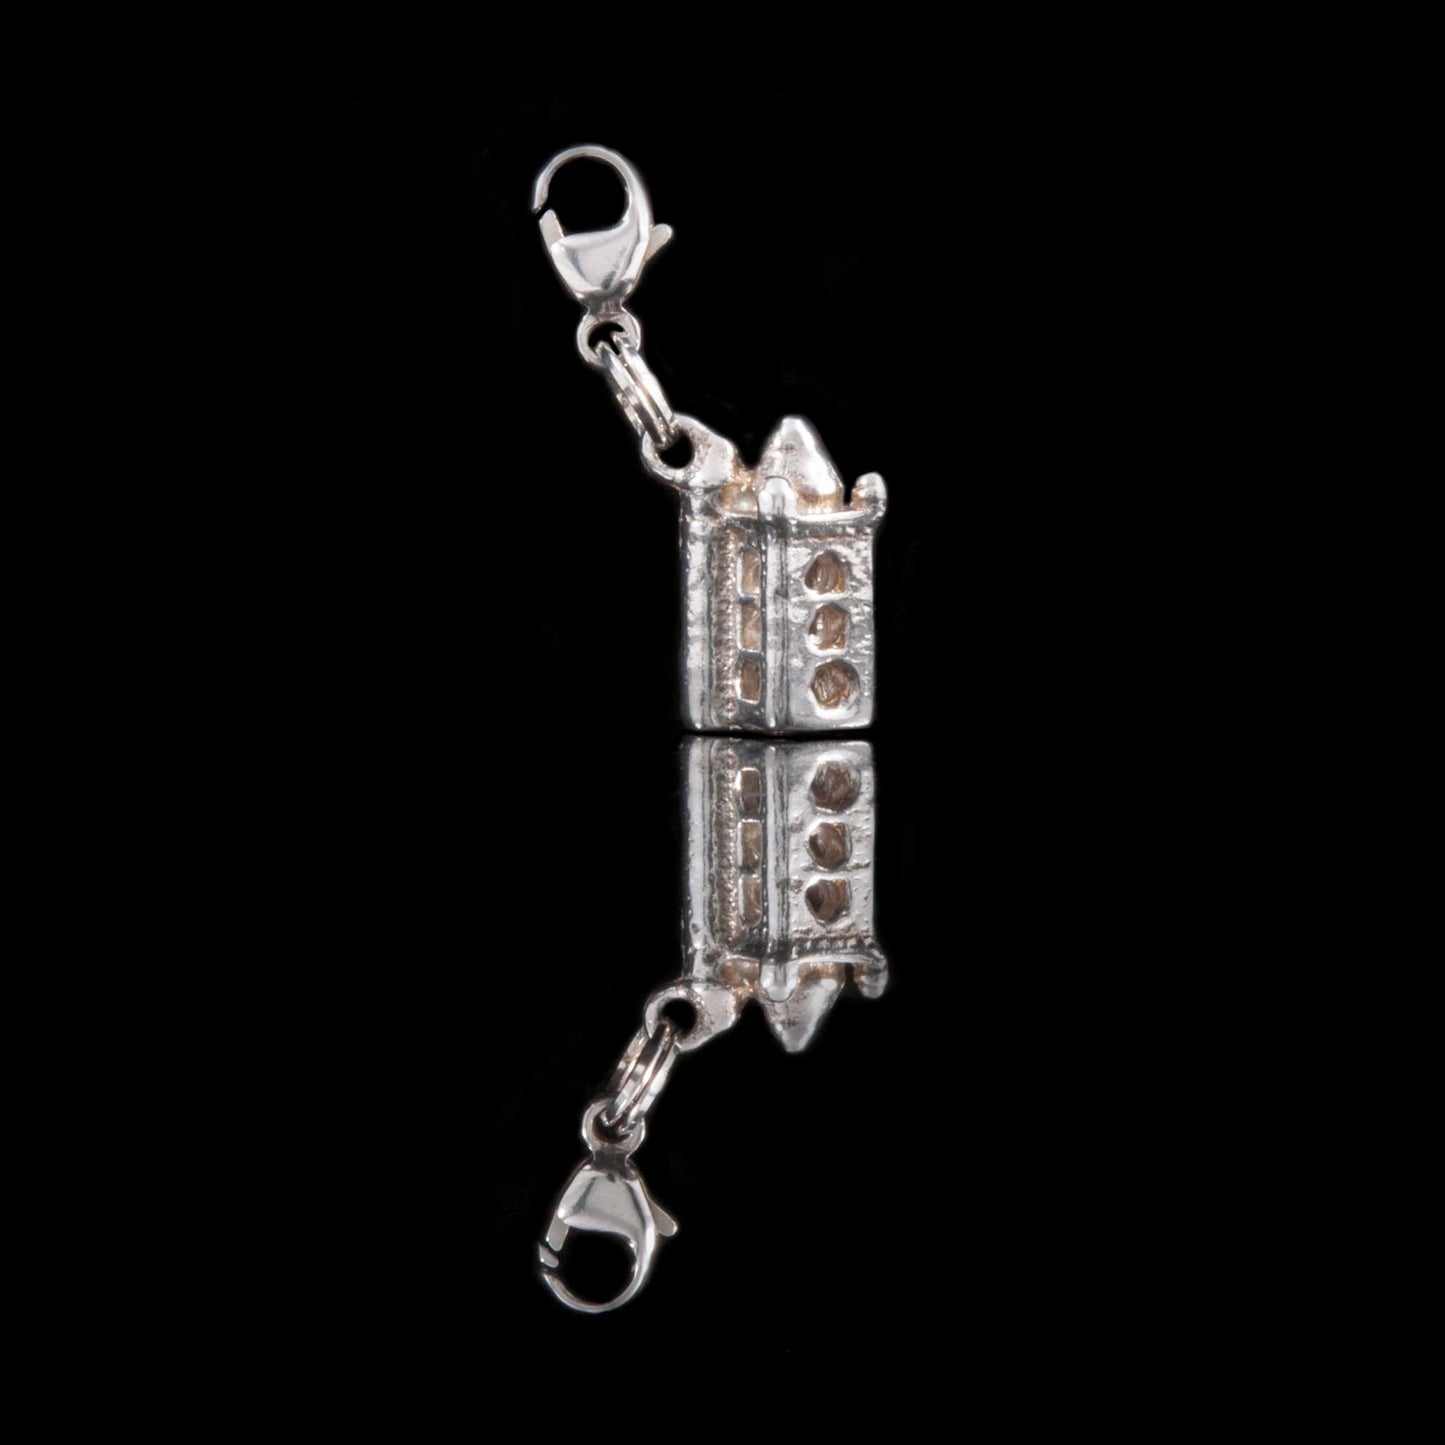 Sterling Silver Scrabo Tower Charm This is a lovely sterling silver Scrabo Tower charm. If you visit Newtownards and County Down you will see Scrabo Tower. So maybe you could add this NI charm to your bracelet to remind you of your time in Northern Ireland.